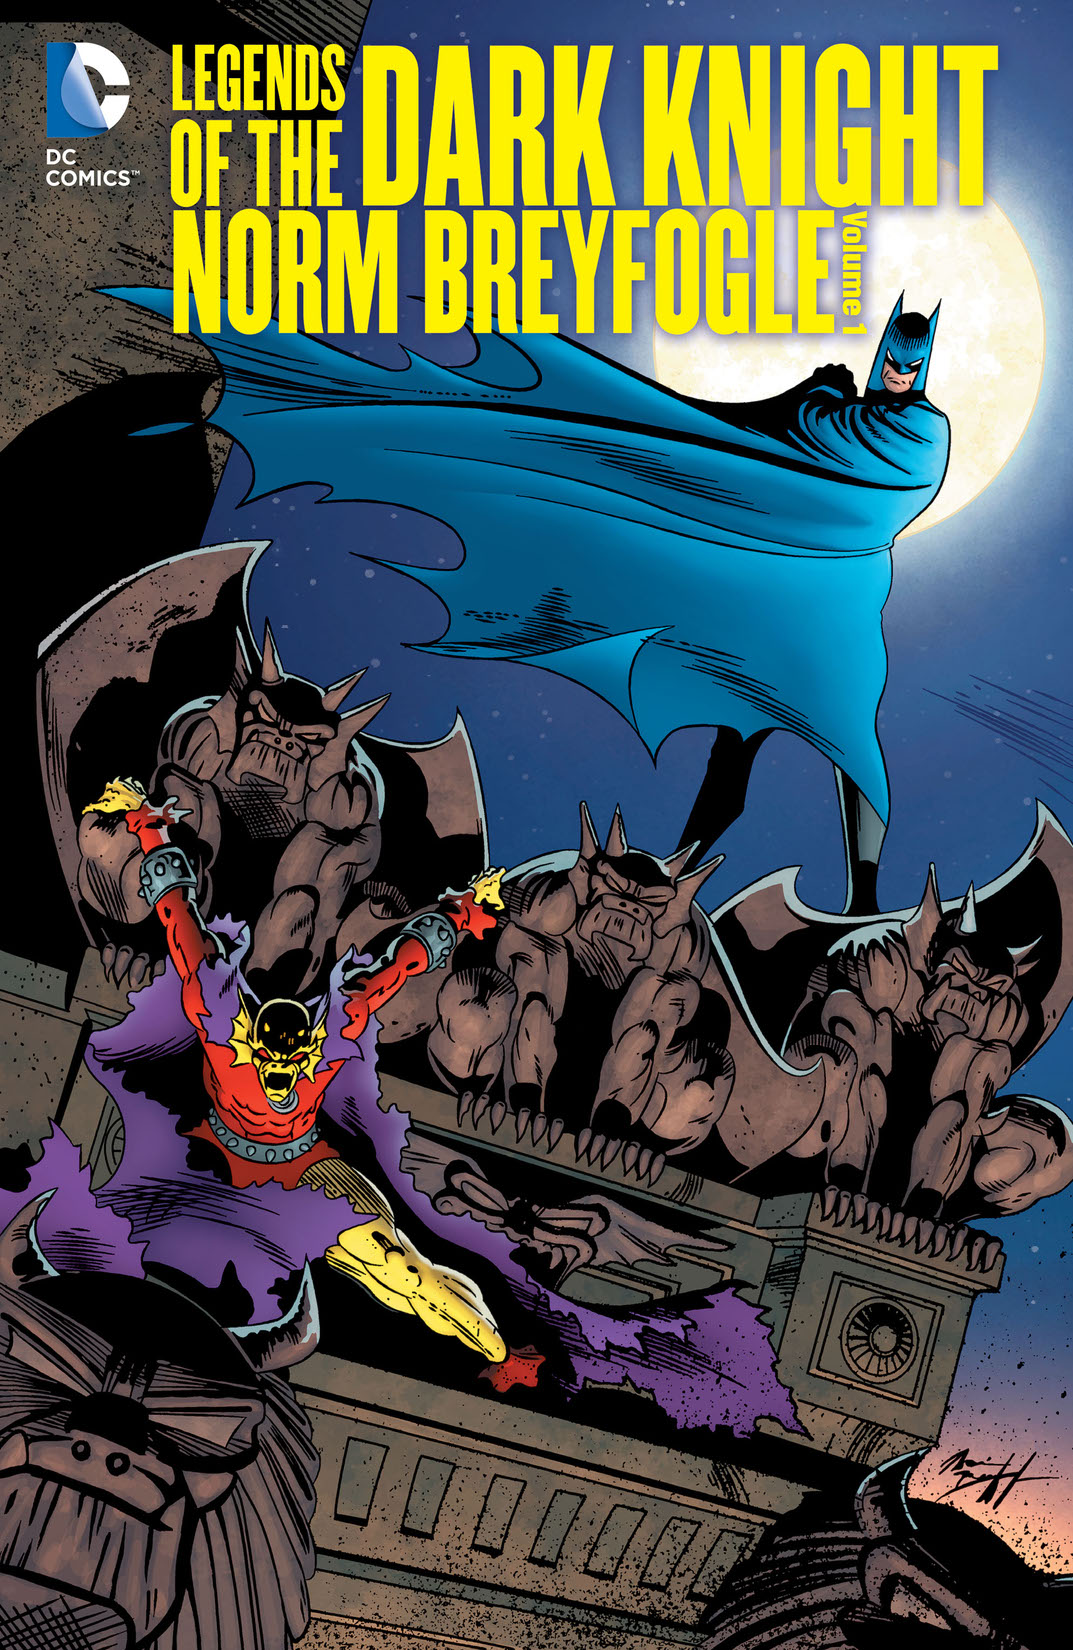 Legends of The Dark Knight: Norm Breyfogle Vol. 1 preview images